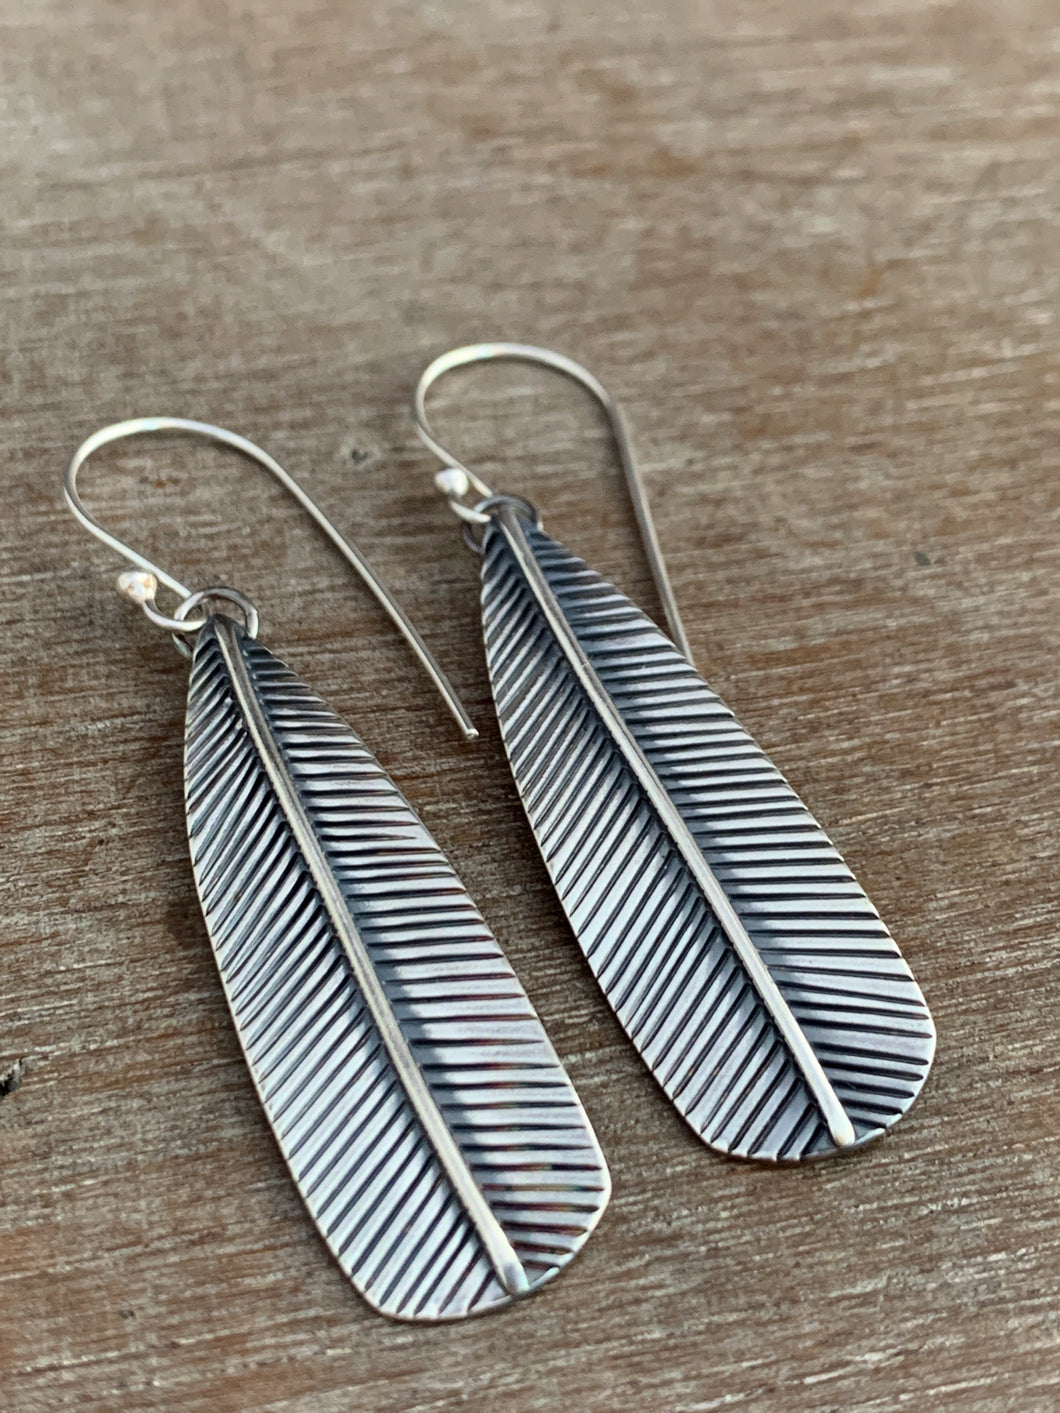 Medium/small Stamped silver feather earrings